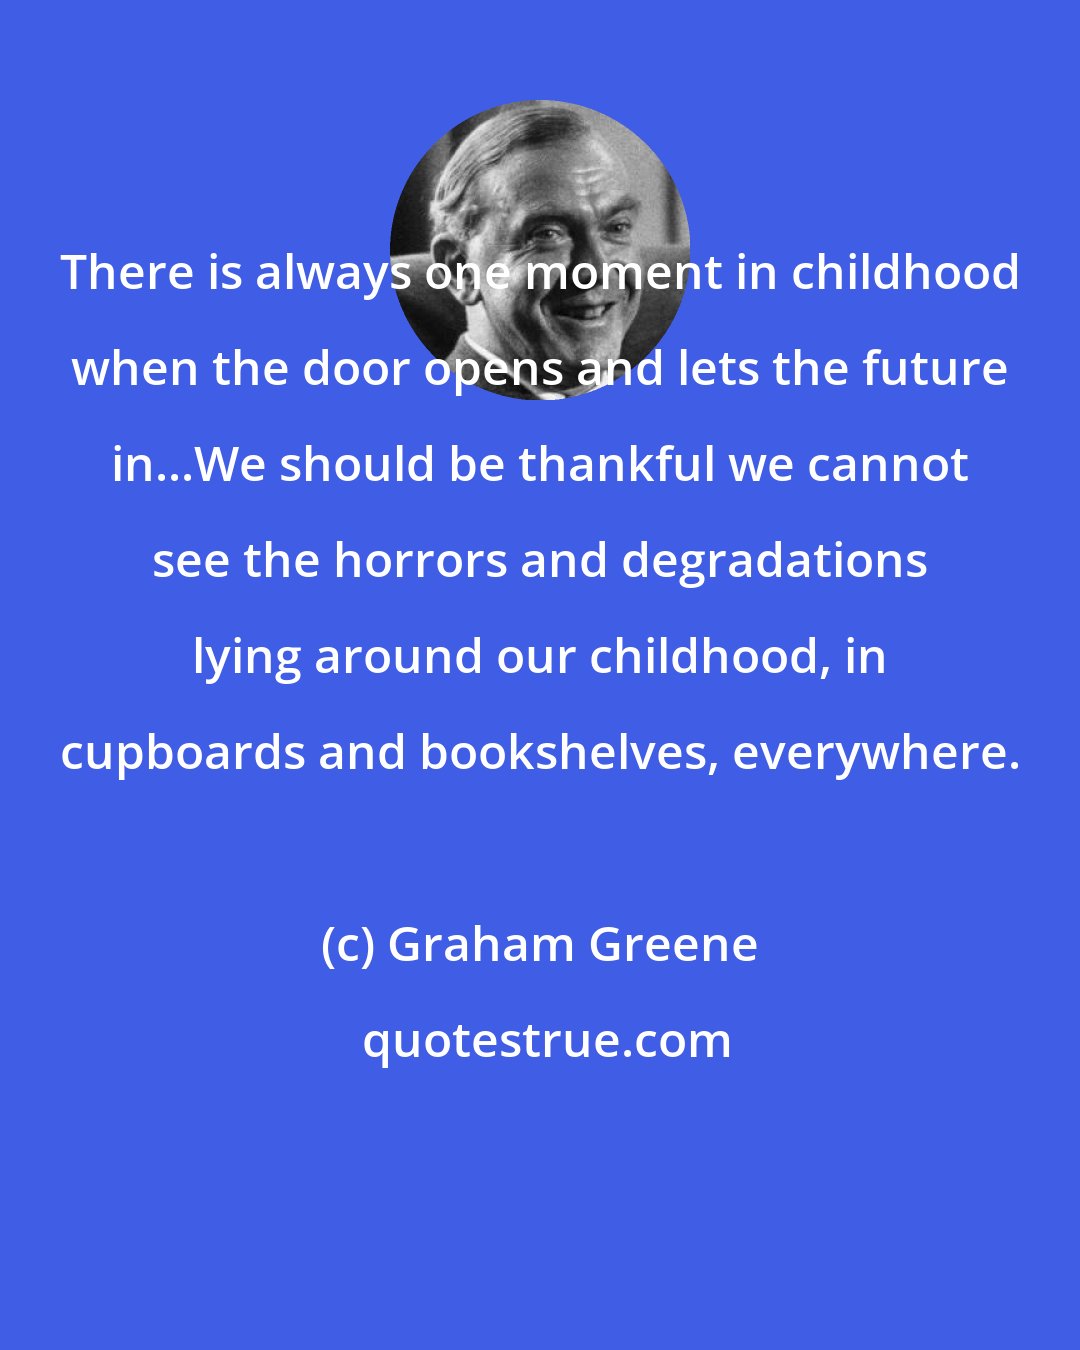 Graham Greene: There is always one moment in childhood when the door opens and lets the future in...We should be thankful we cannot see the horrors and degradations lying around our childhood, in cupboards and bookshelves, everywhere.